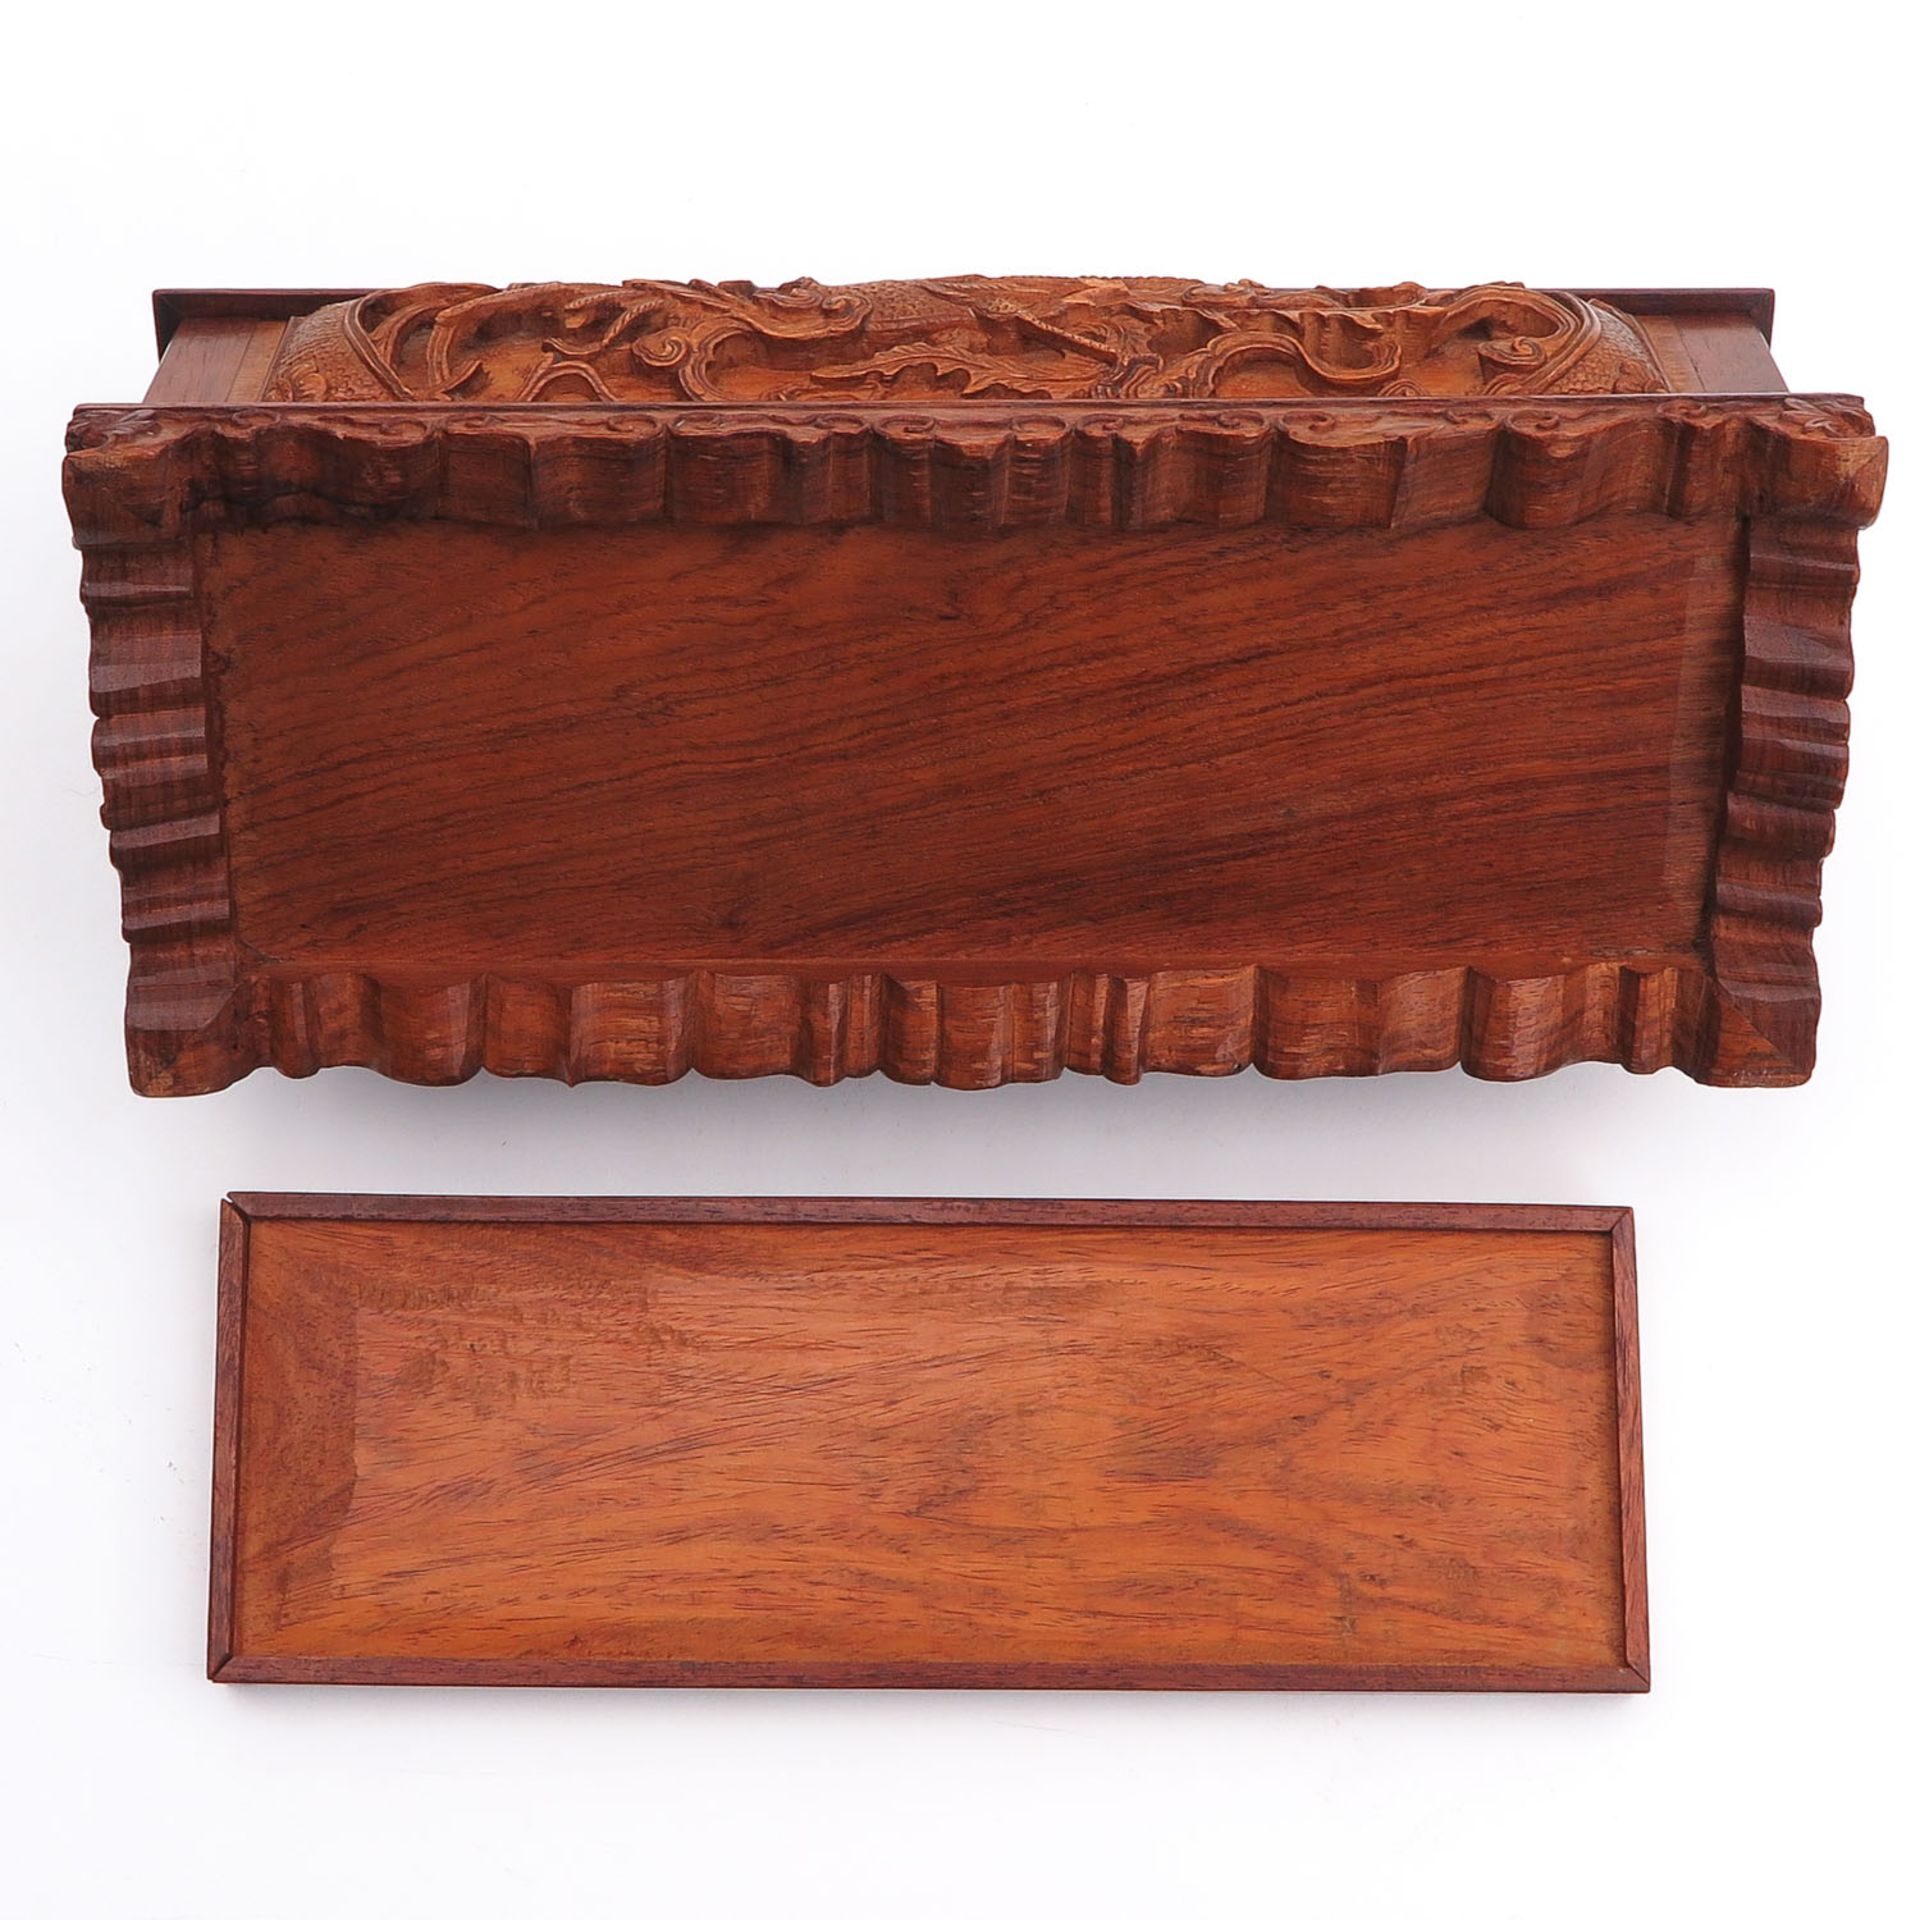 A Carved Wood Box - Image 6 of 10